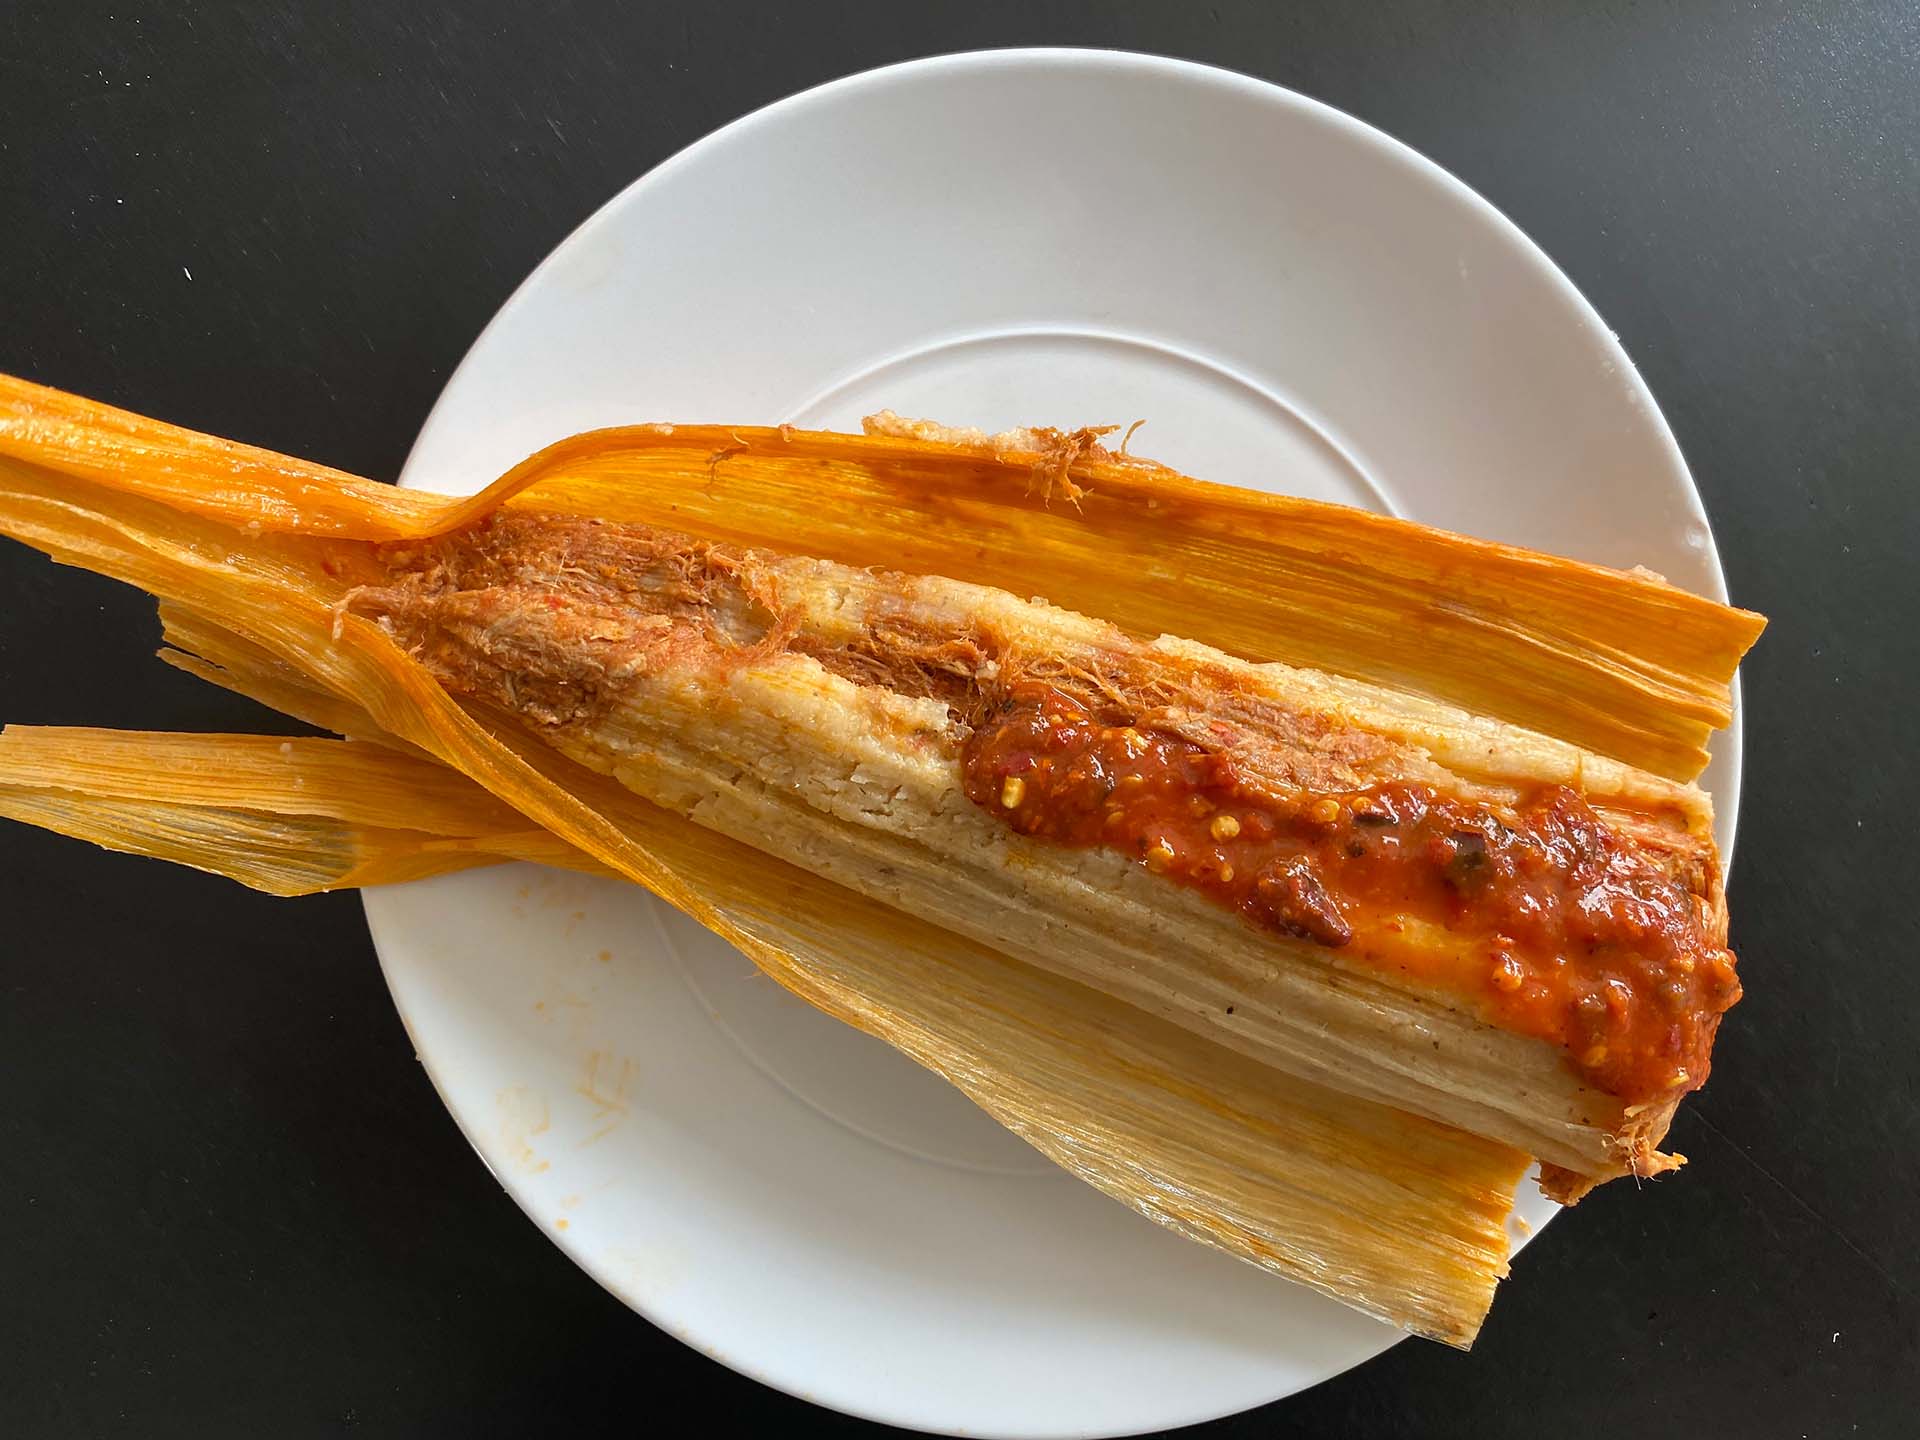 A tamal that has been opened. It has been topped with red salsa, and the cooked masa inside the corn husk is visible.